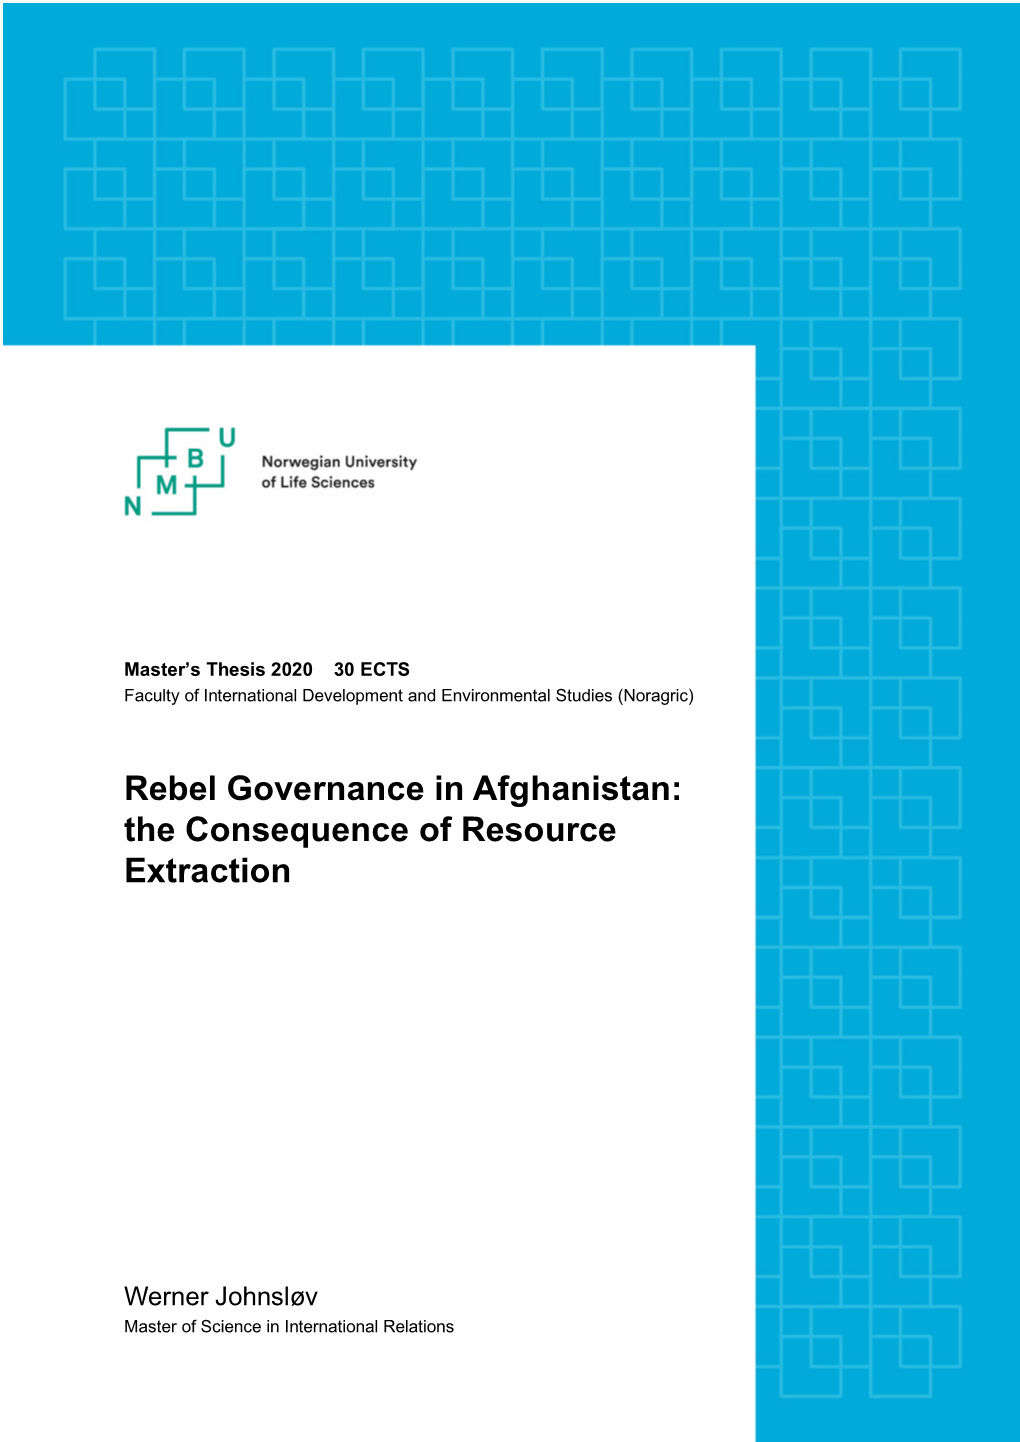 Rebel Governance in Afghanistan: the Consequence of Resource Extraction